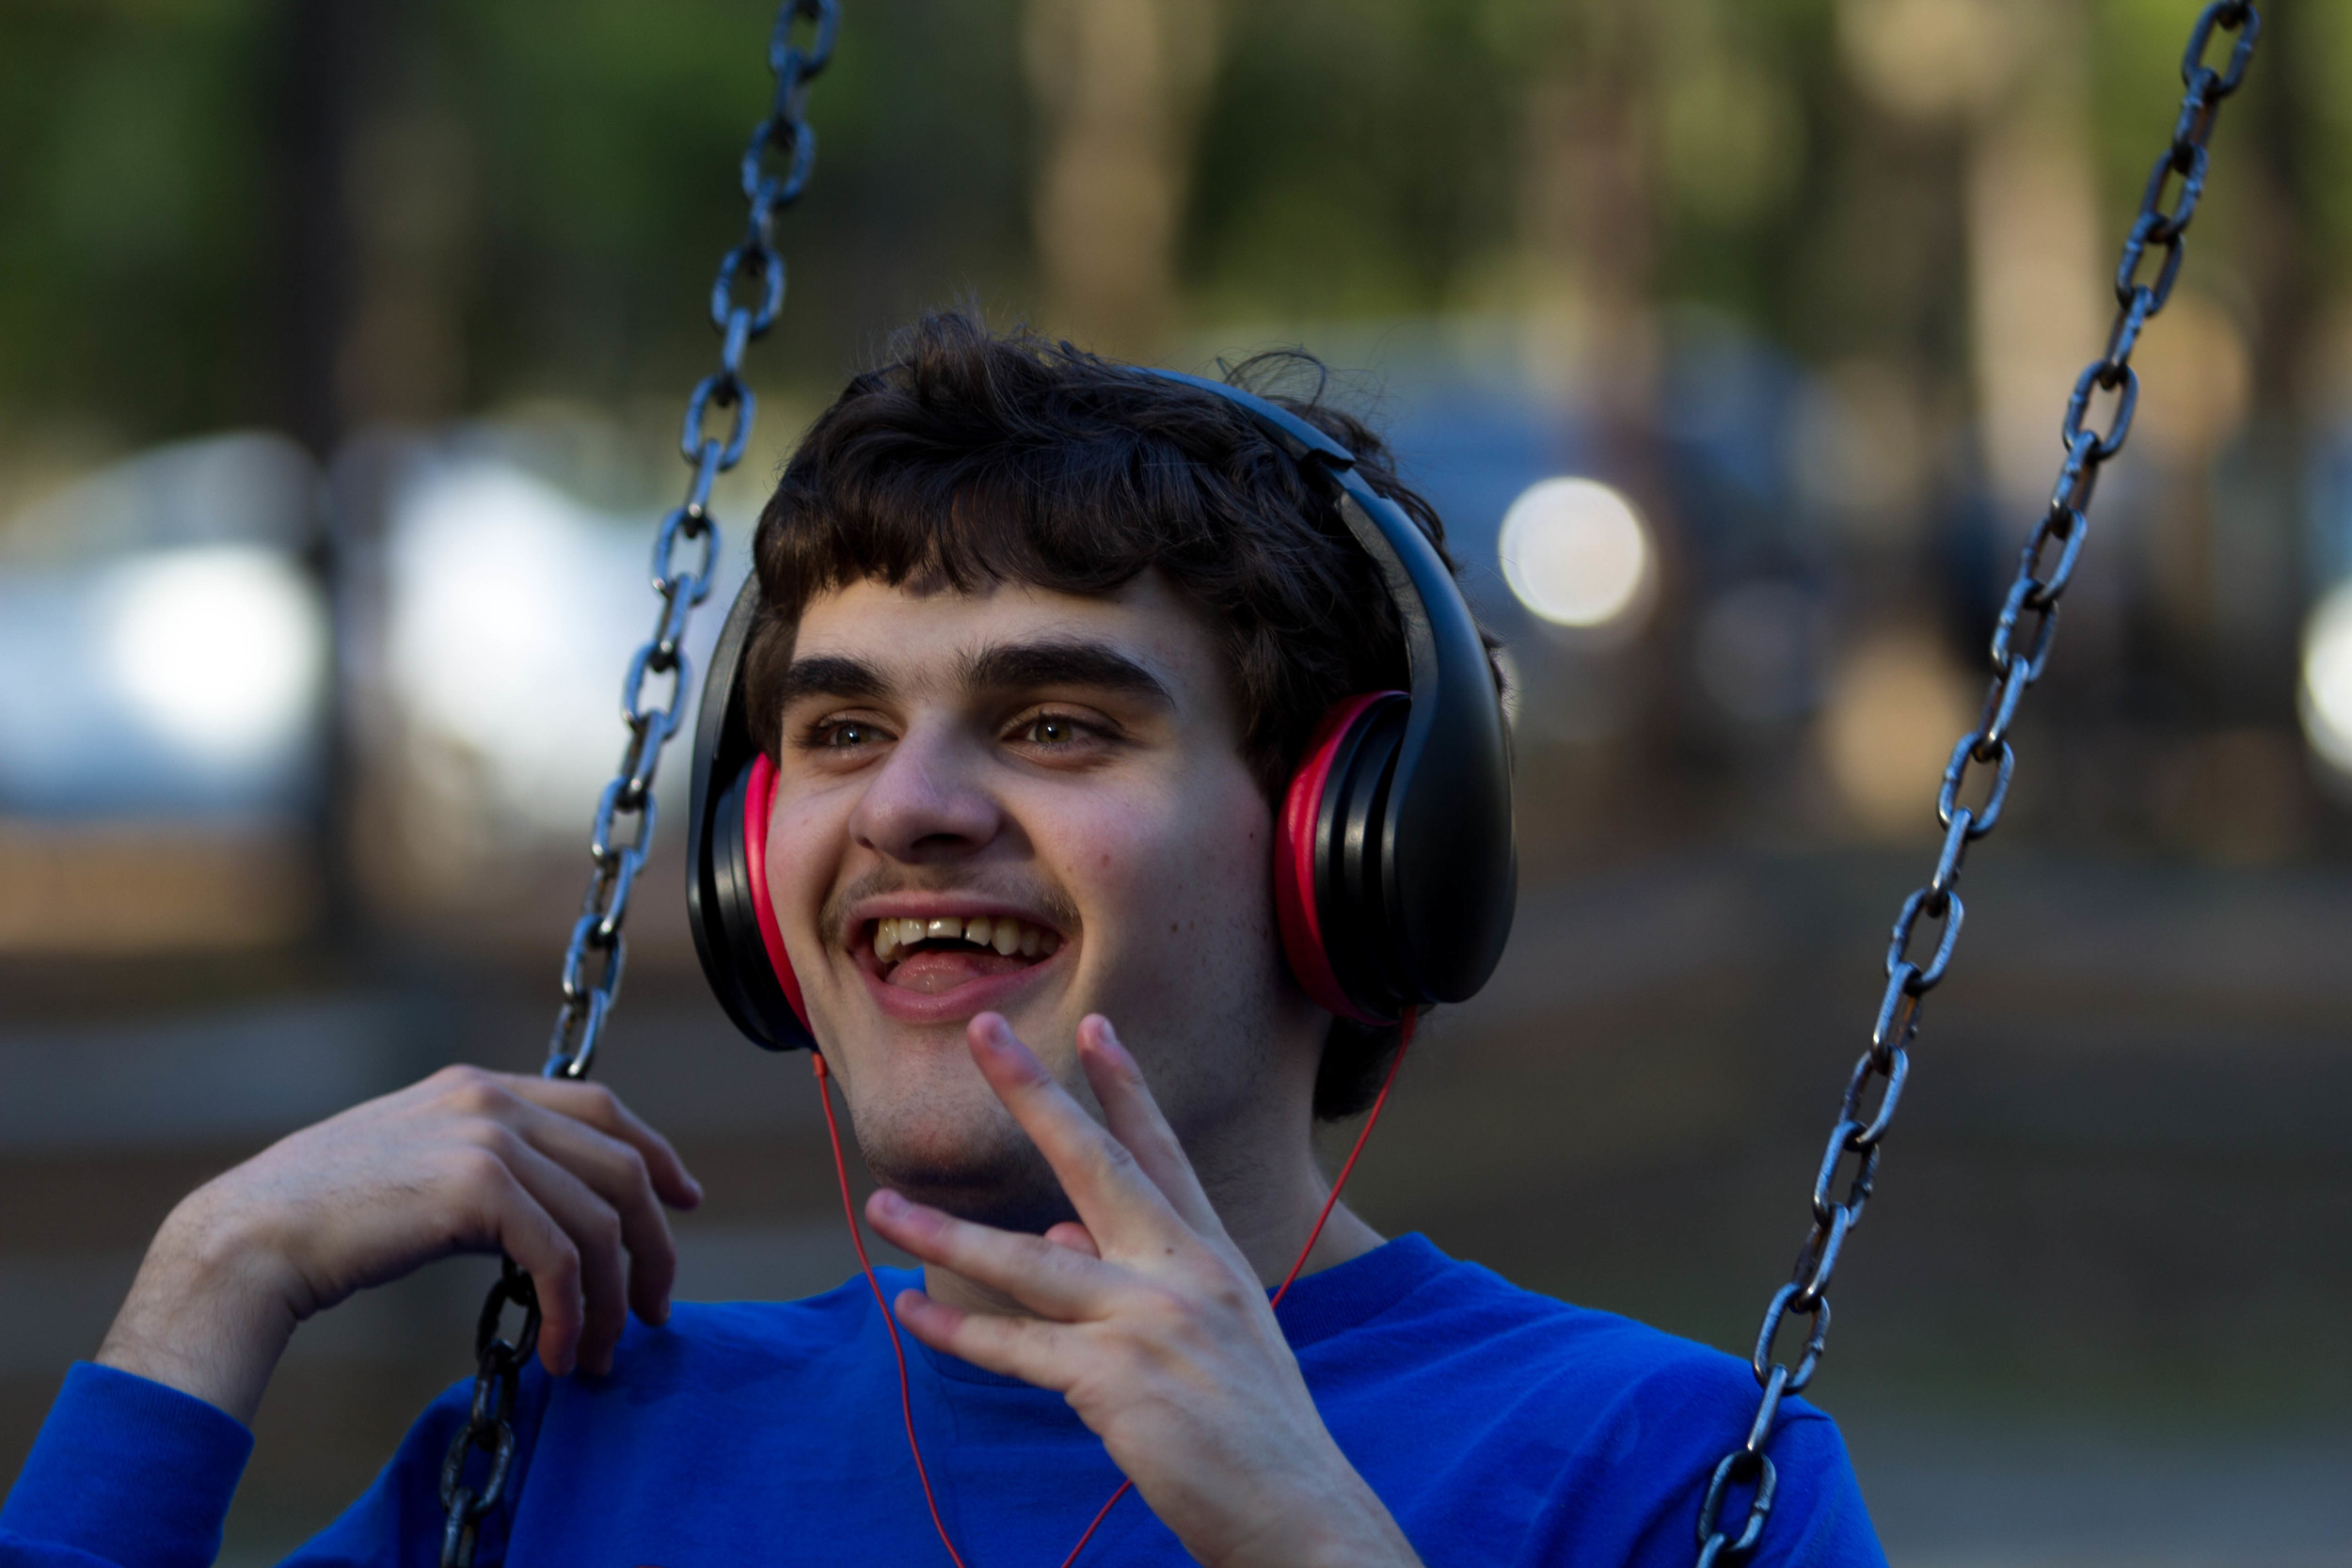  “I know Zack will never live alone,” Vicki said. “He will either be always living with us or if he lives in a home away from us, it will be a group home. I would rather him live with us. He’s my son.”  Zack listens to children's songs while swinging